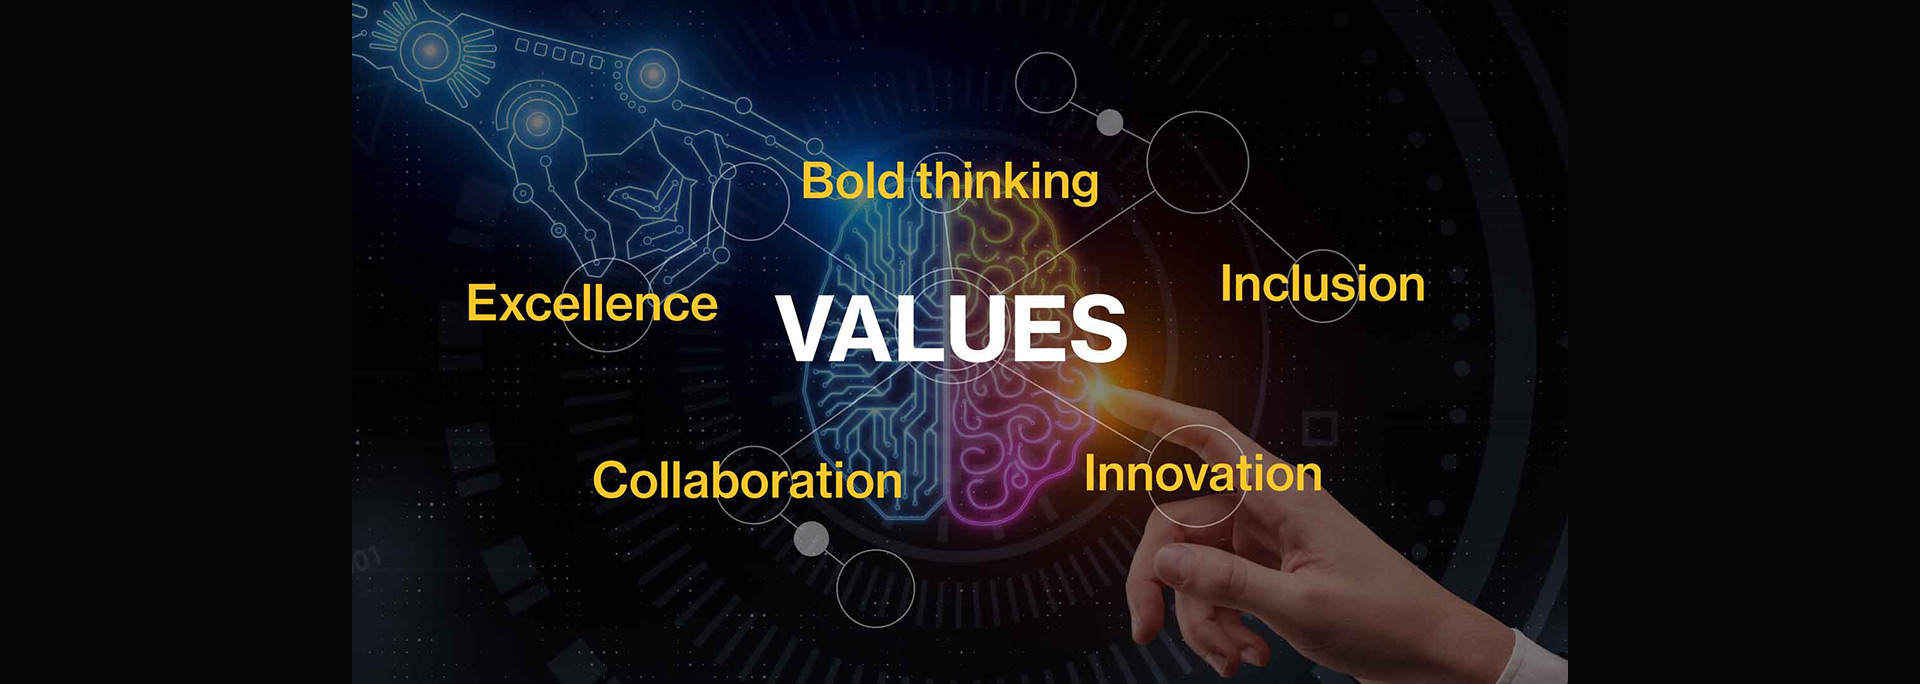 Fulton Schools values are excellence, bold thinking, inclusion, innovation, collaboration.